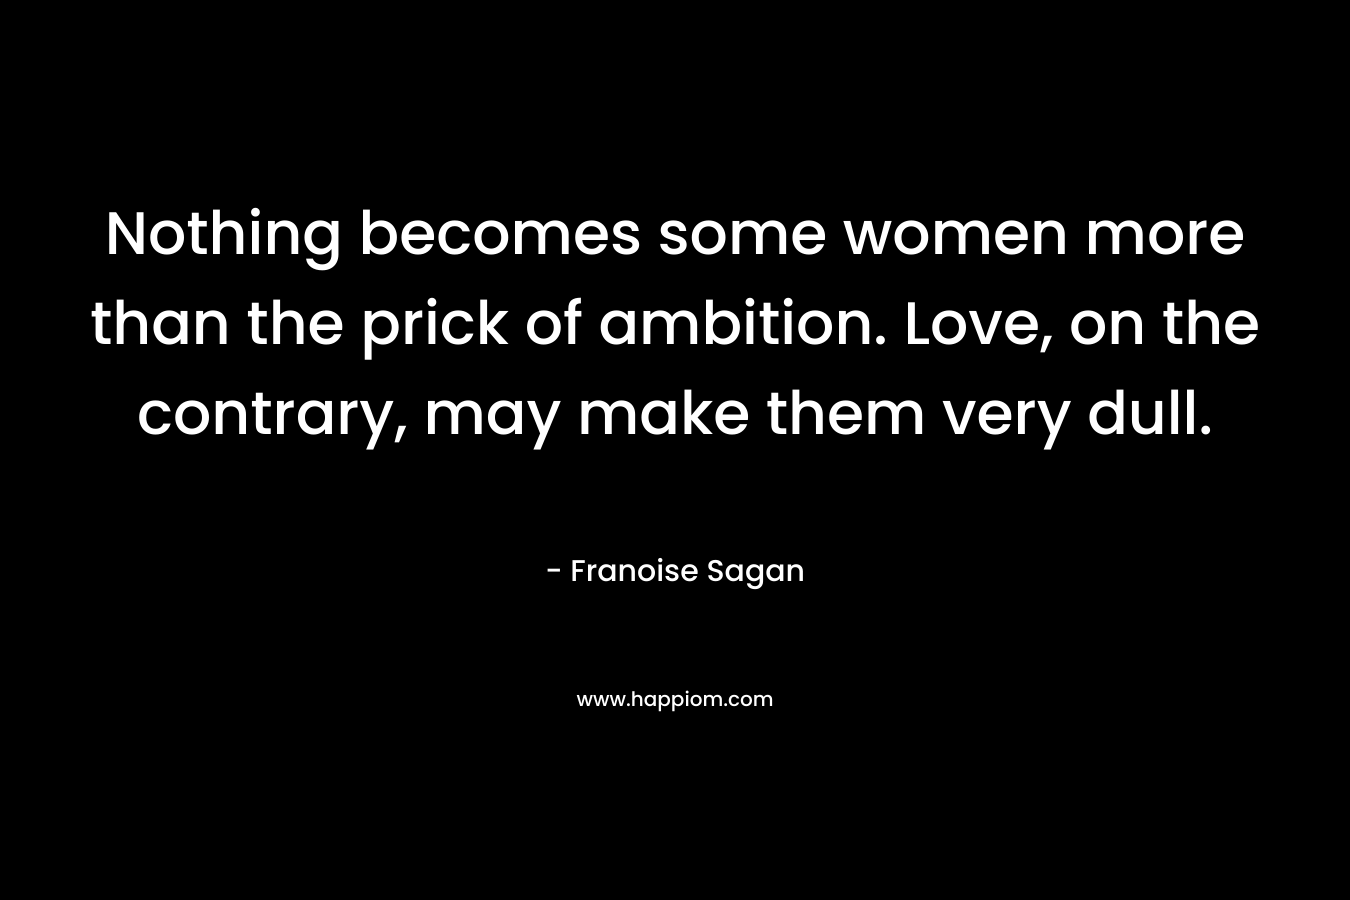 Nothing becomes some women more than the prick of ambition. Love, on the contrary, may make them very dull. – Franoise Sagan